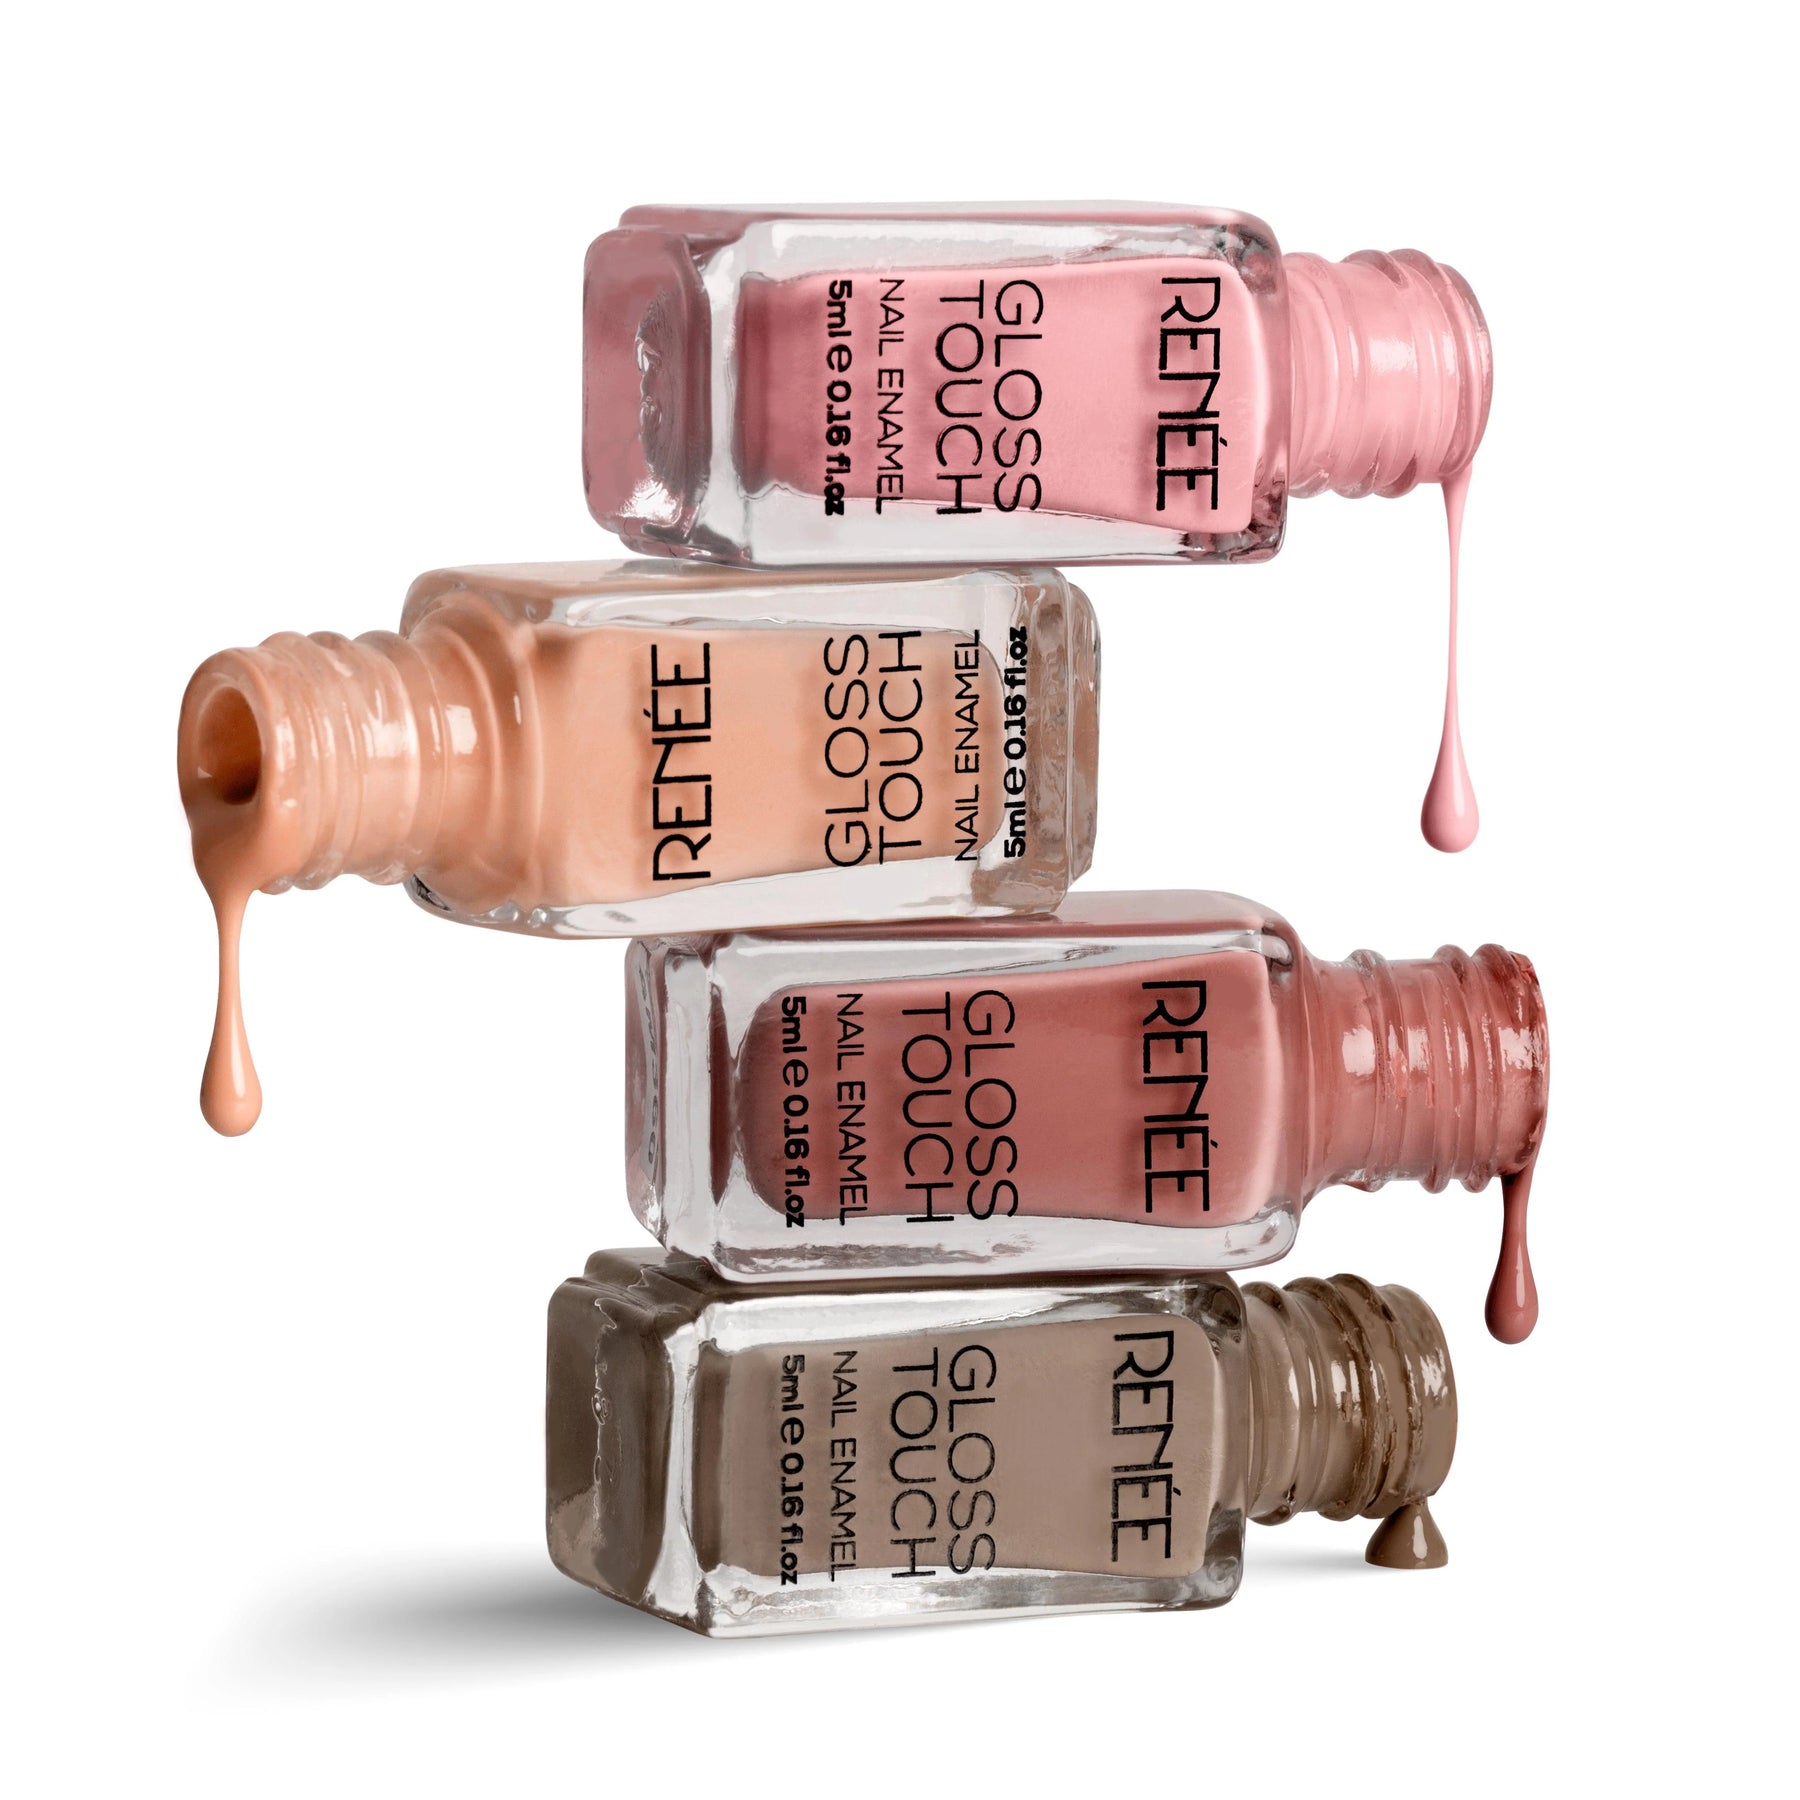 RENEE Gloss Touch Set Of 4 Nail Enamels 5 ml